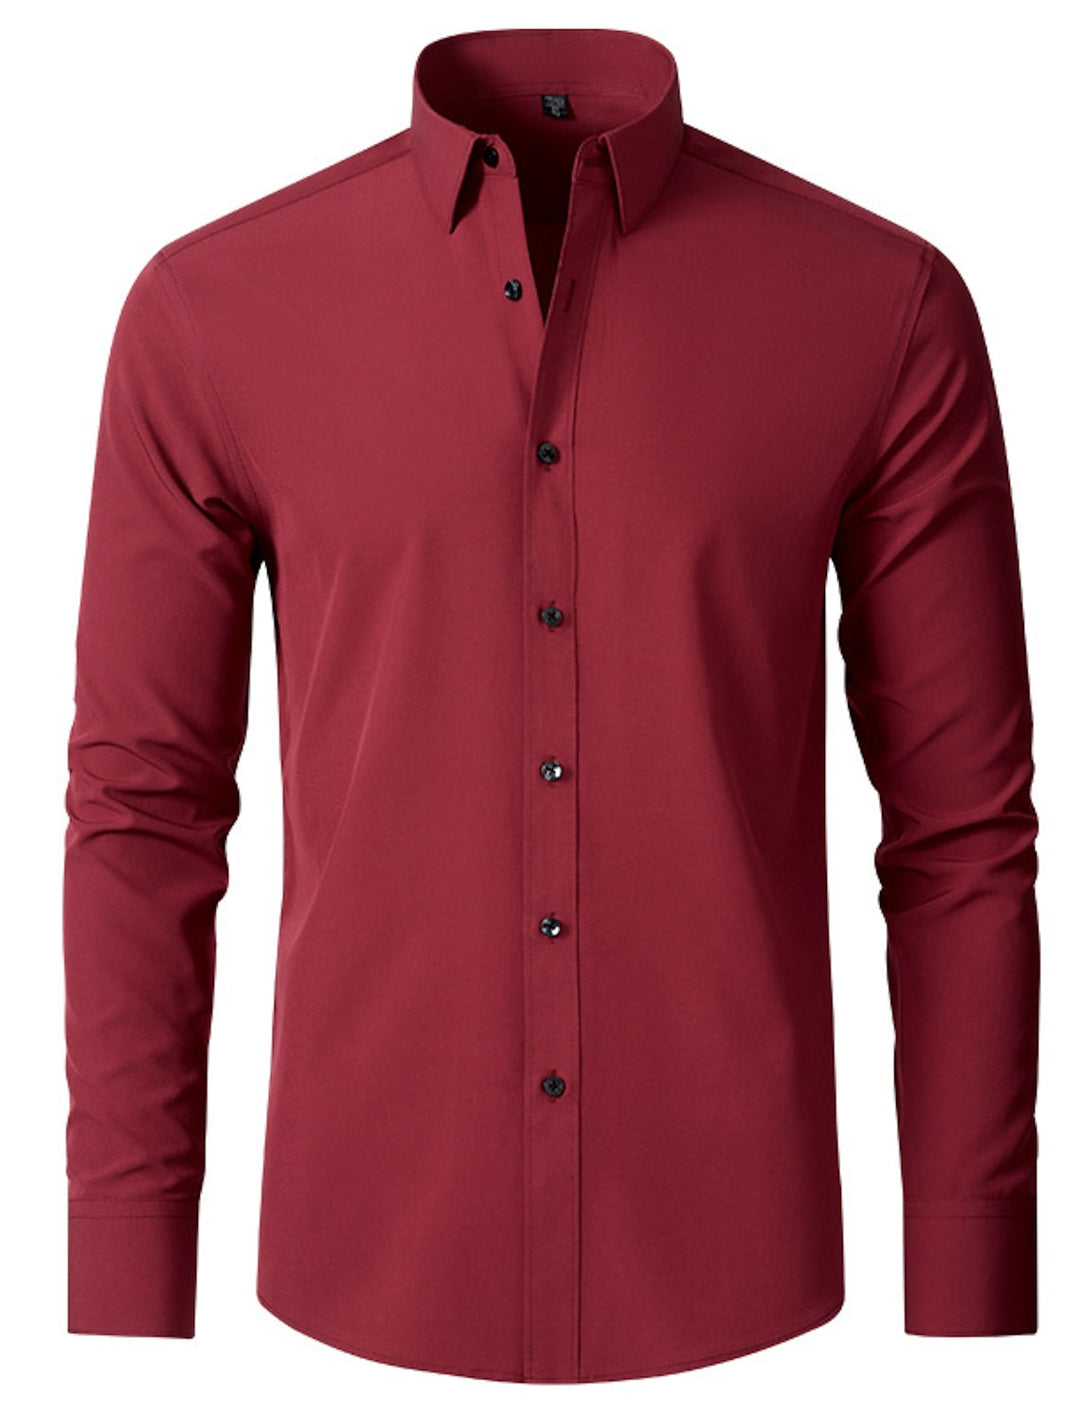 White Red Black Purple Pink Men's Long Sleeves Classic Solid Color Shirt